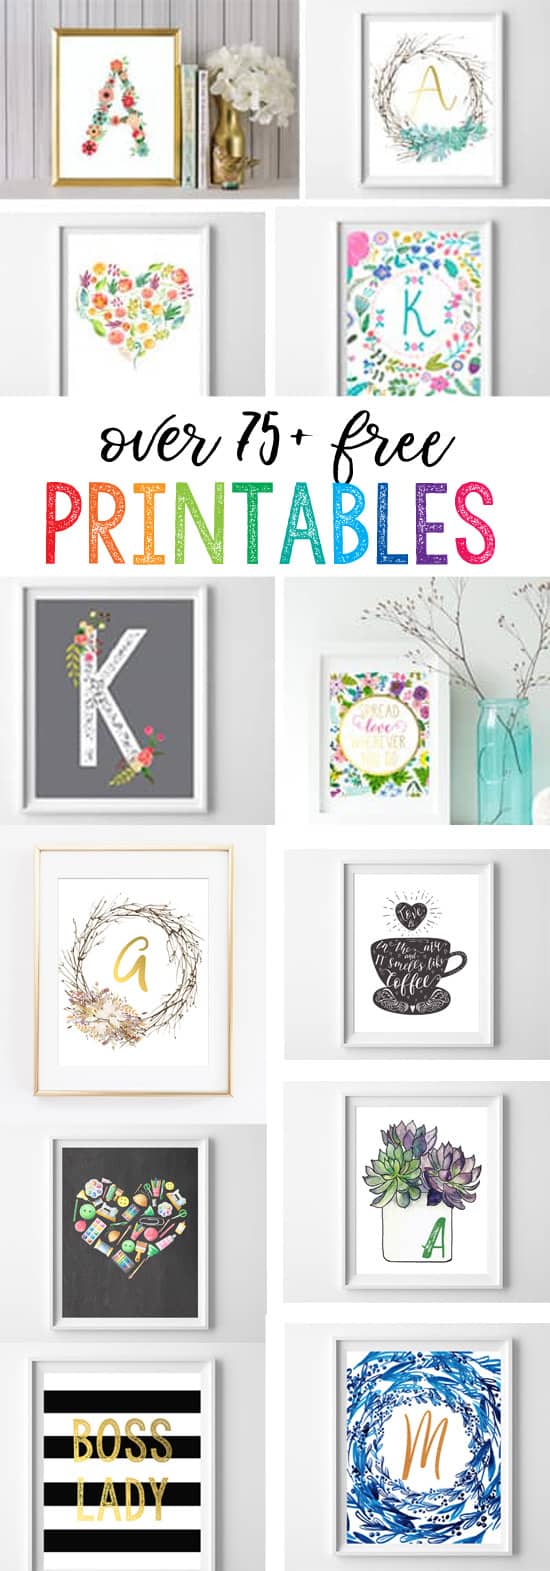 Free Printables For The Home